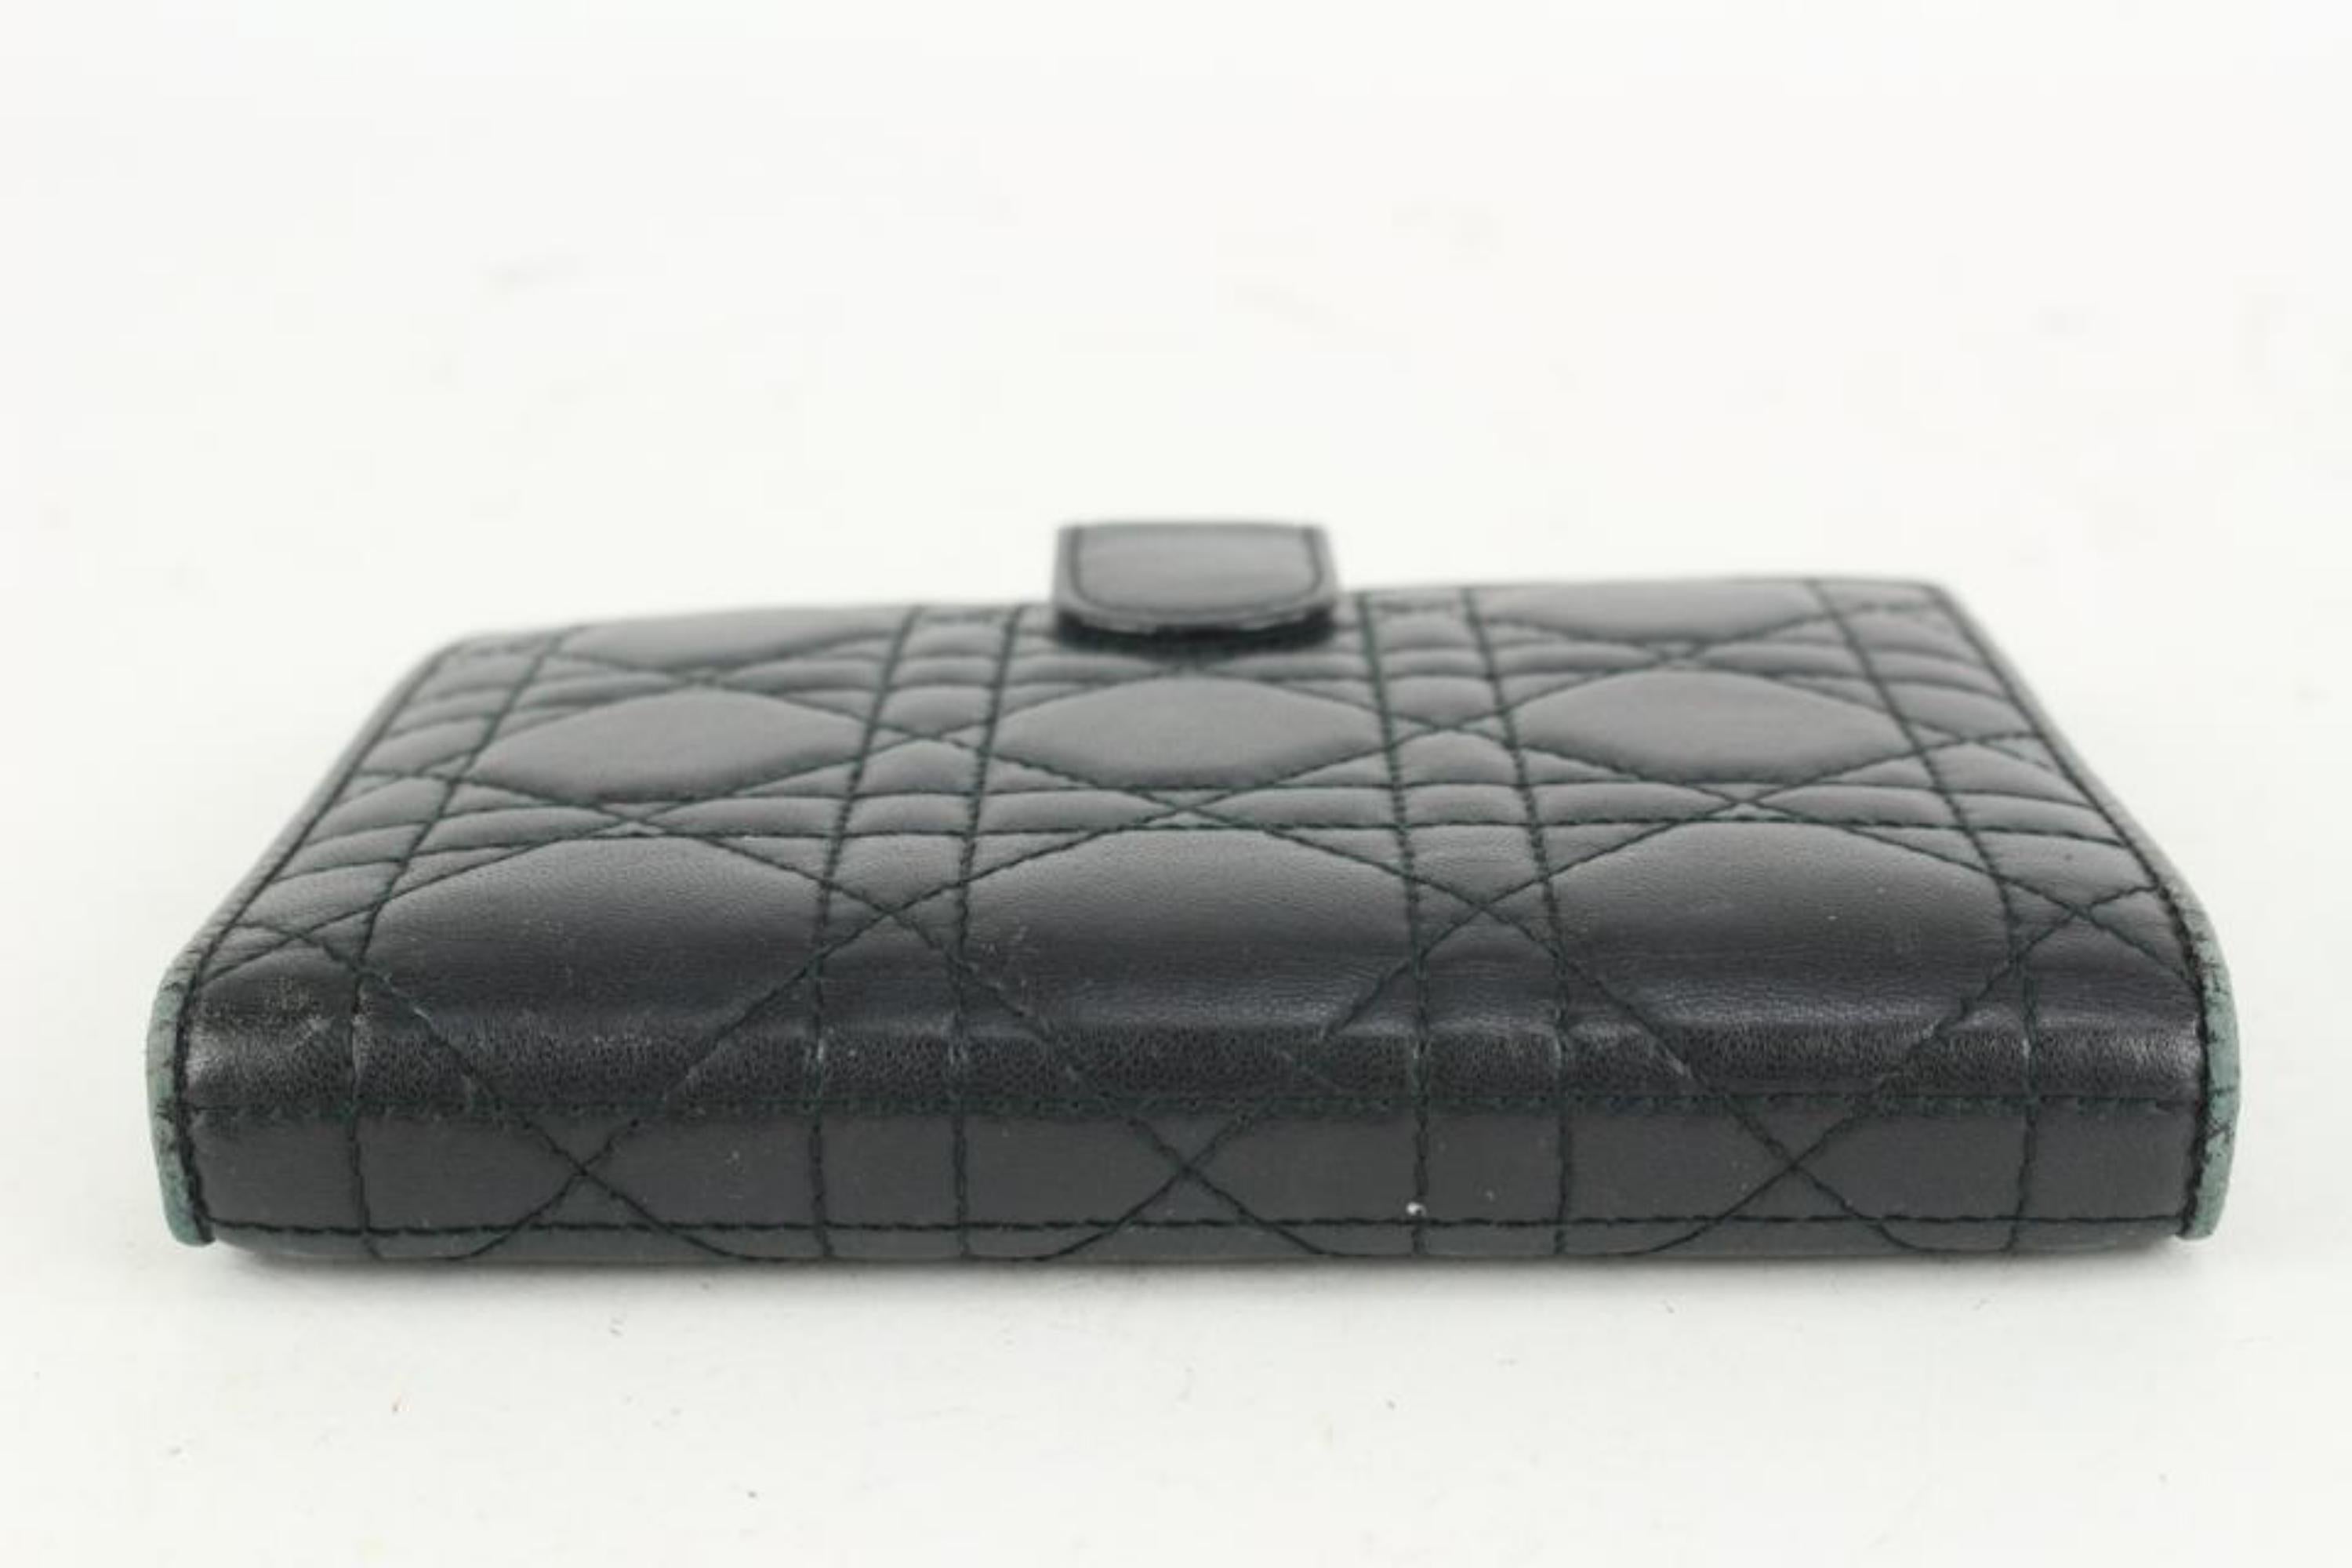 Dior Black Quilted Leather Cannage Small Agenda PM Notebook Cover 923da1 For Sale 1